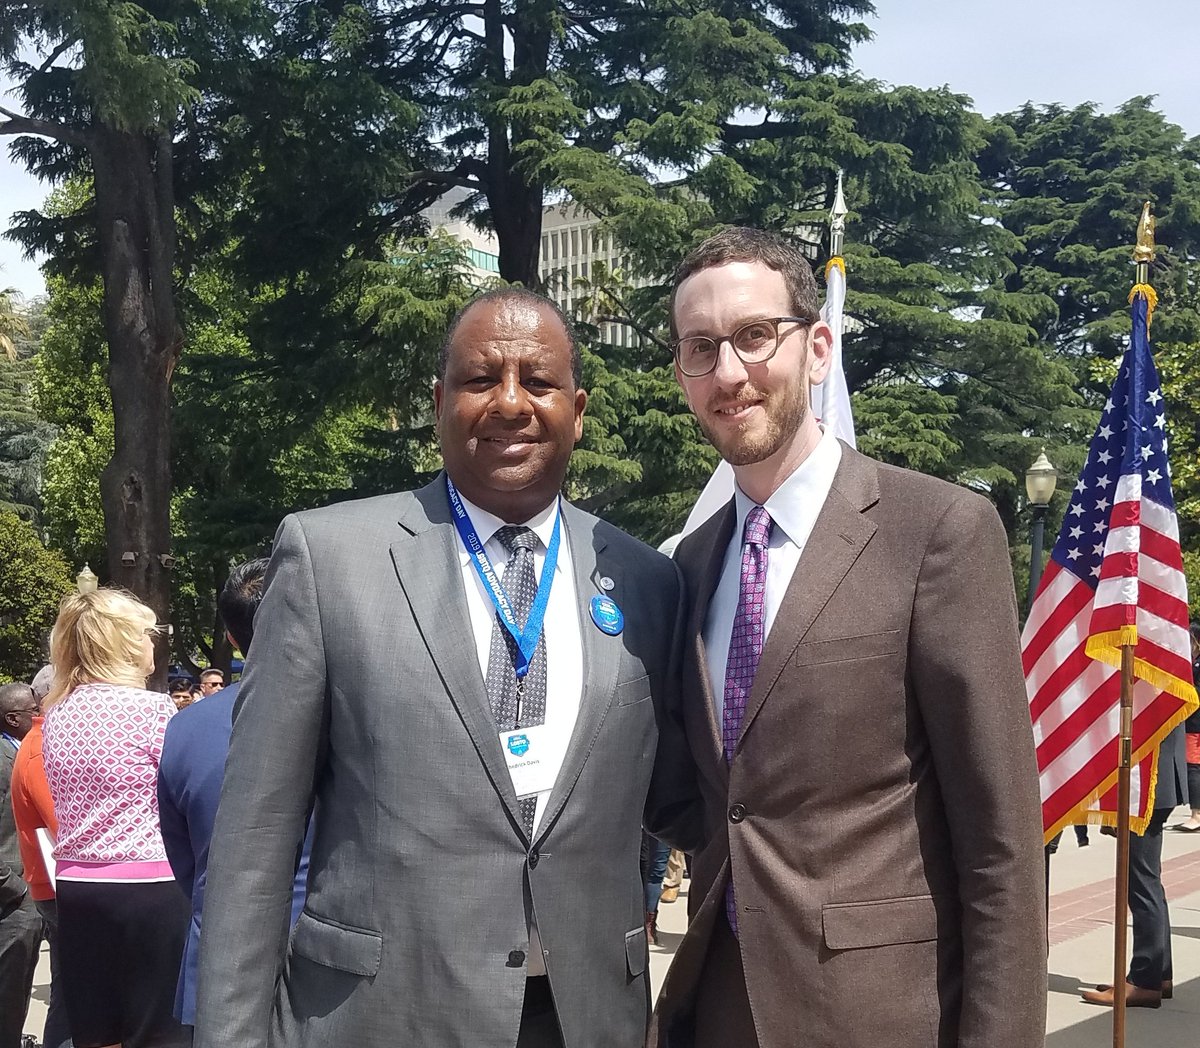 Proud to stand on behalf of @LambdaLegal with CA Senator @Scott_Wiener and his bills during #LGBTQAdvocacyDay promoting equality for our youth with SB145 and dignity for trans community with SB132. @eqca